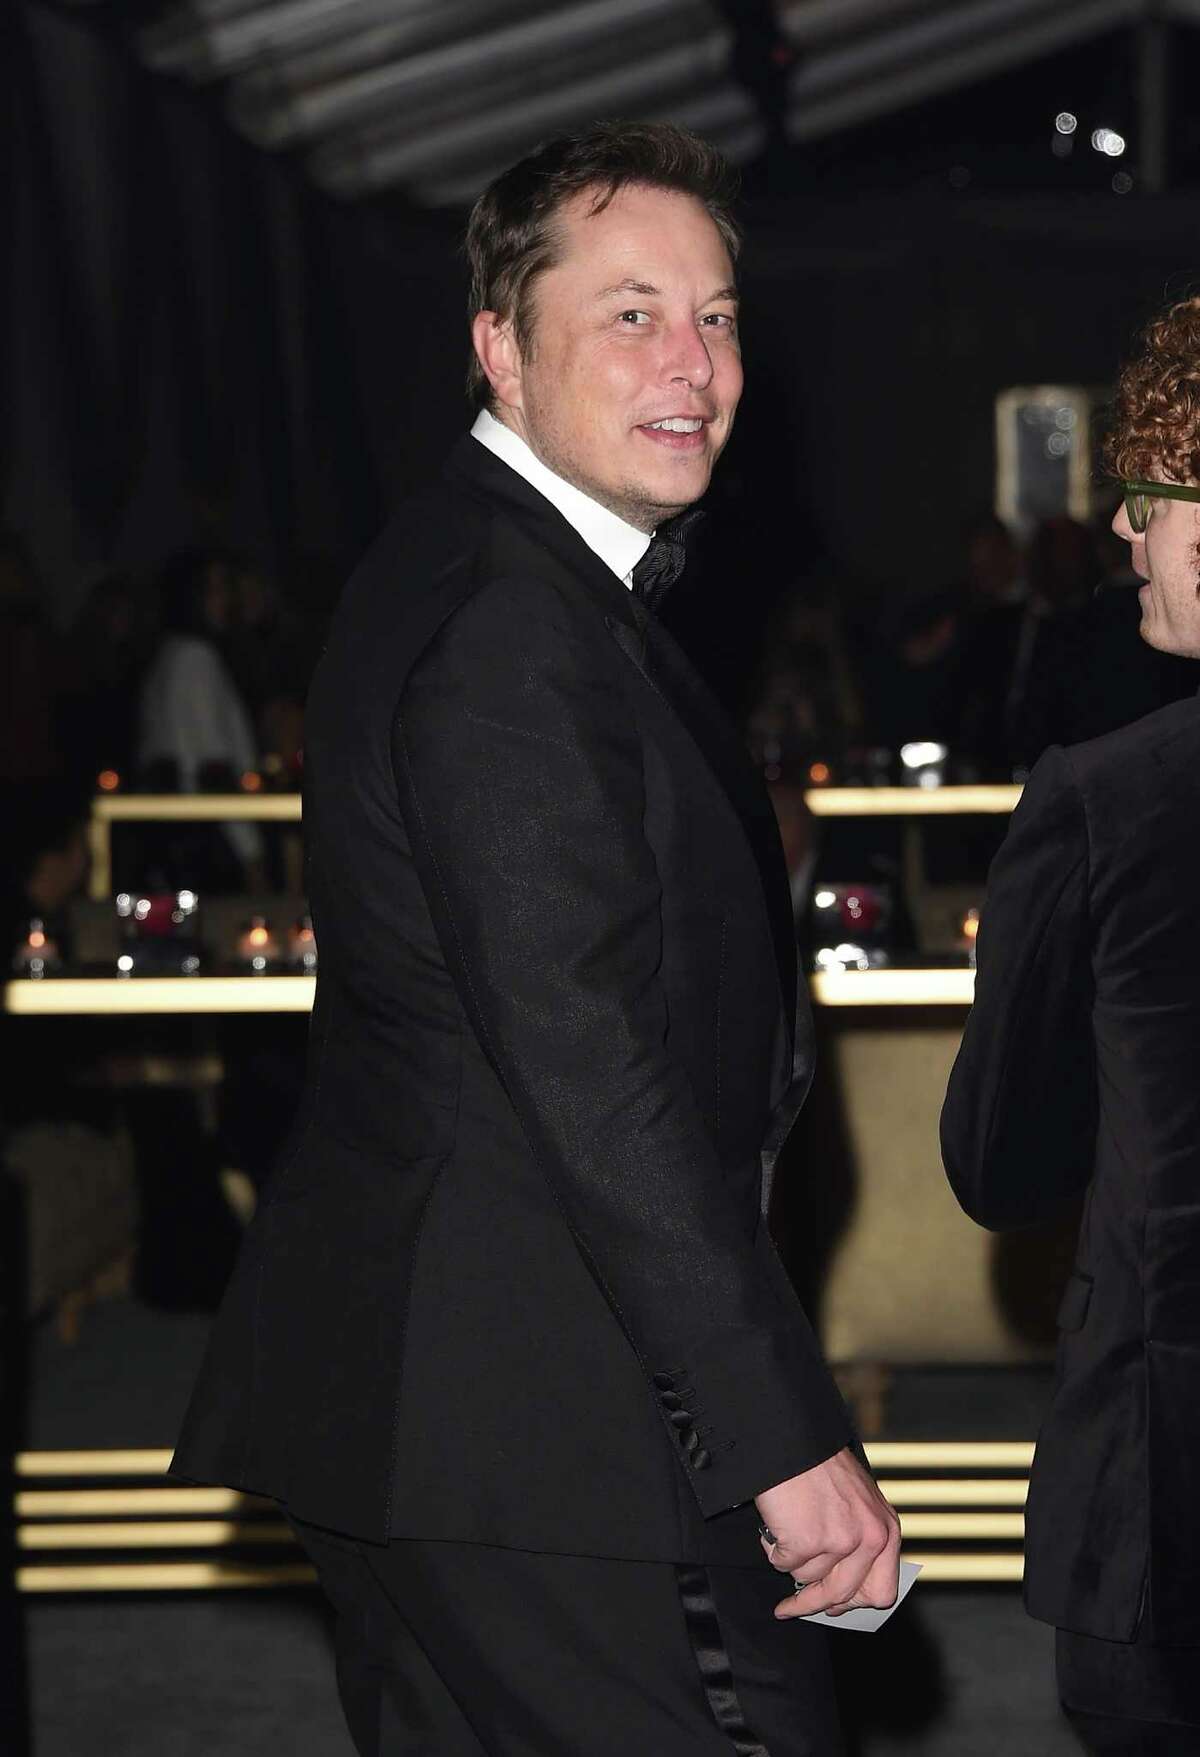 BEVERLY HILLS, CA - DECEMBER 11: Tesla Motor Company and Solar City CEO Elon Musk attends Rihanna's First Annual Diamond Ball at The Vineyard on December 11, 2014 in Beverly Hills, California. (Photo by Jason Merritt/Getty Images)